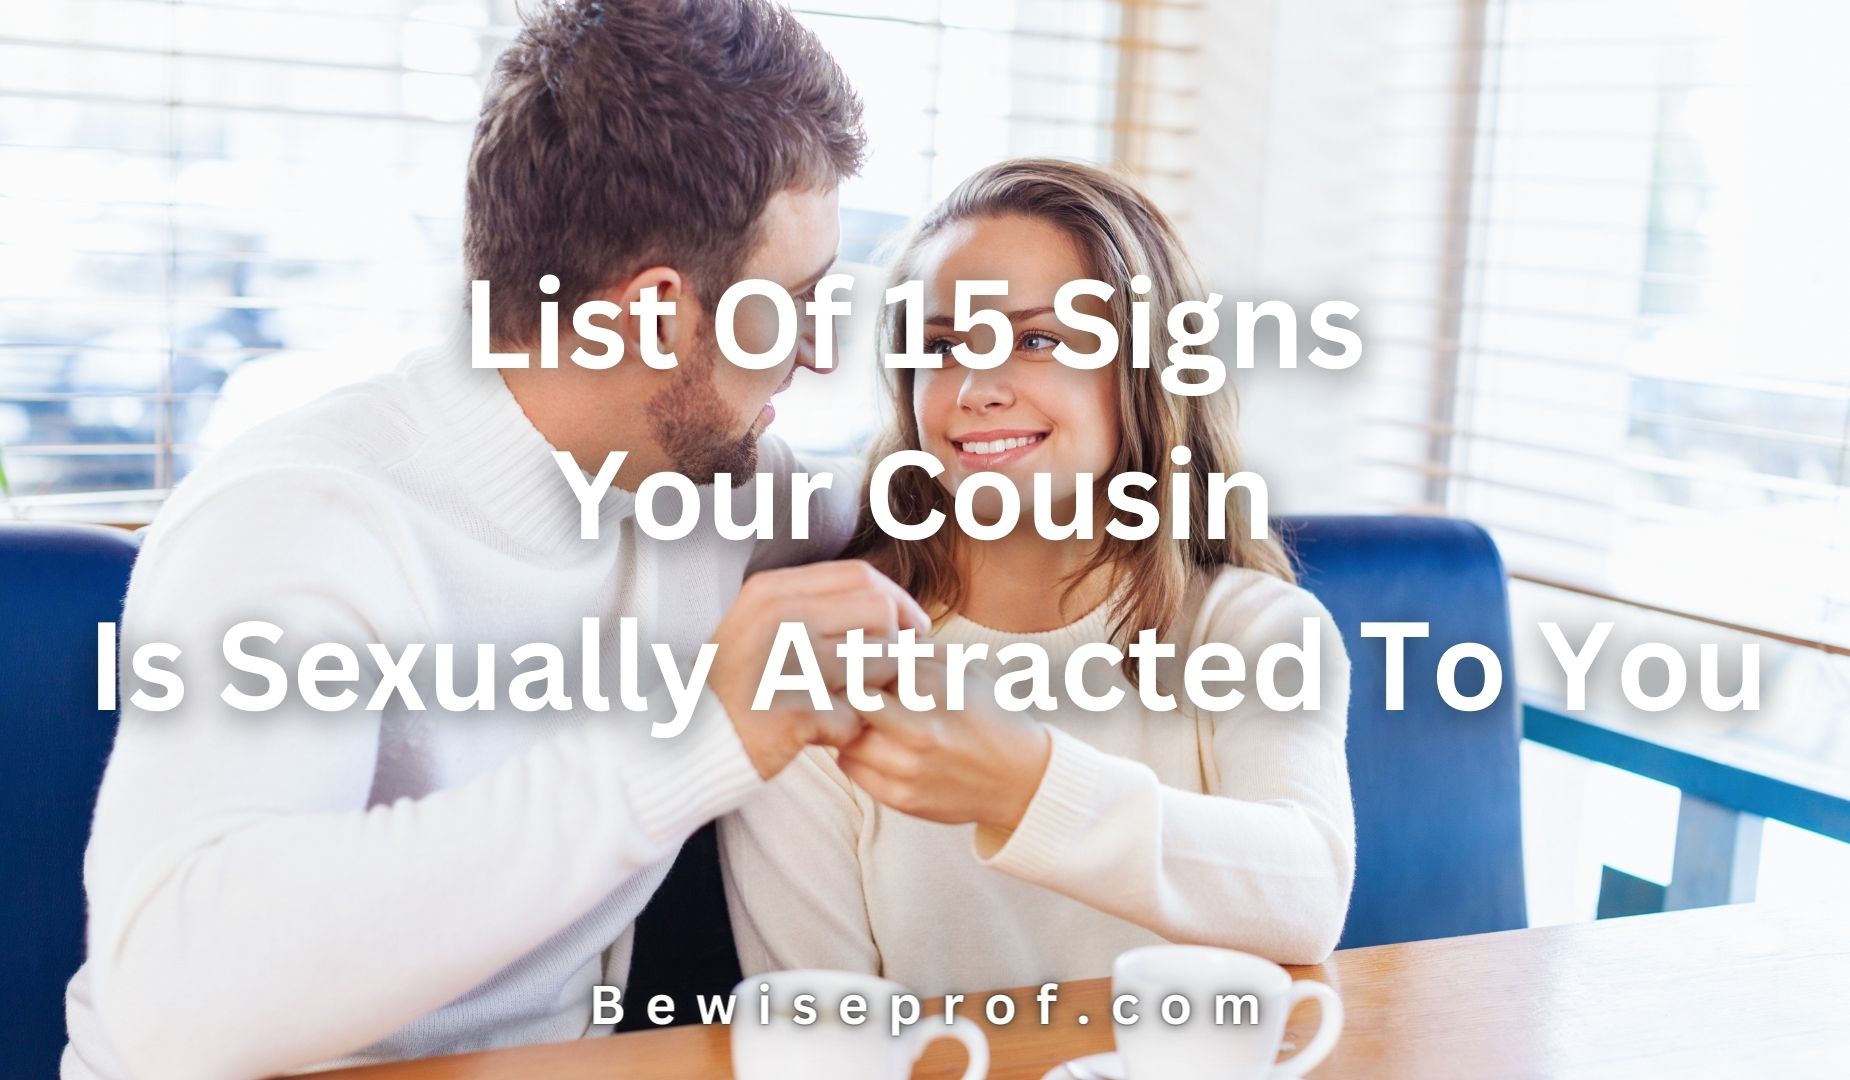 List Of 15 Signs Your Cousin Is Sexually Attracted To You